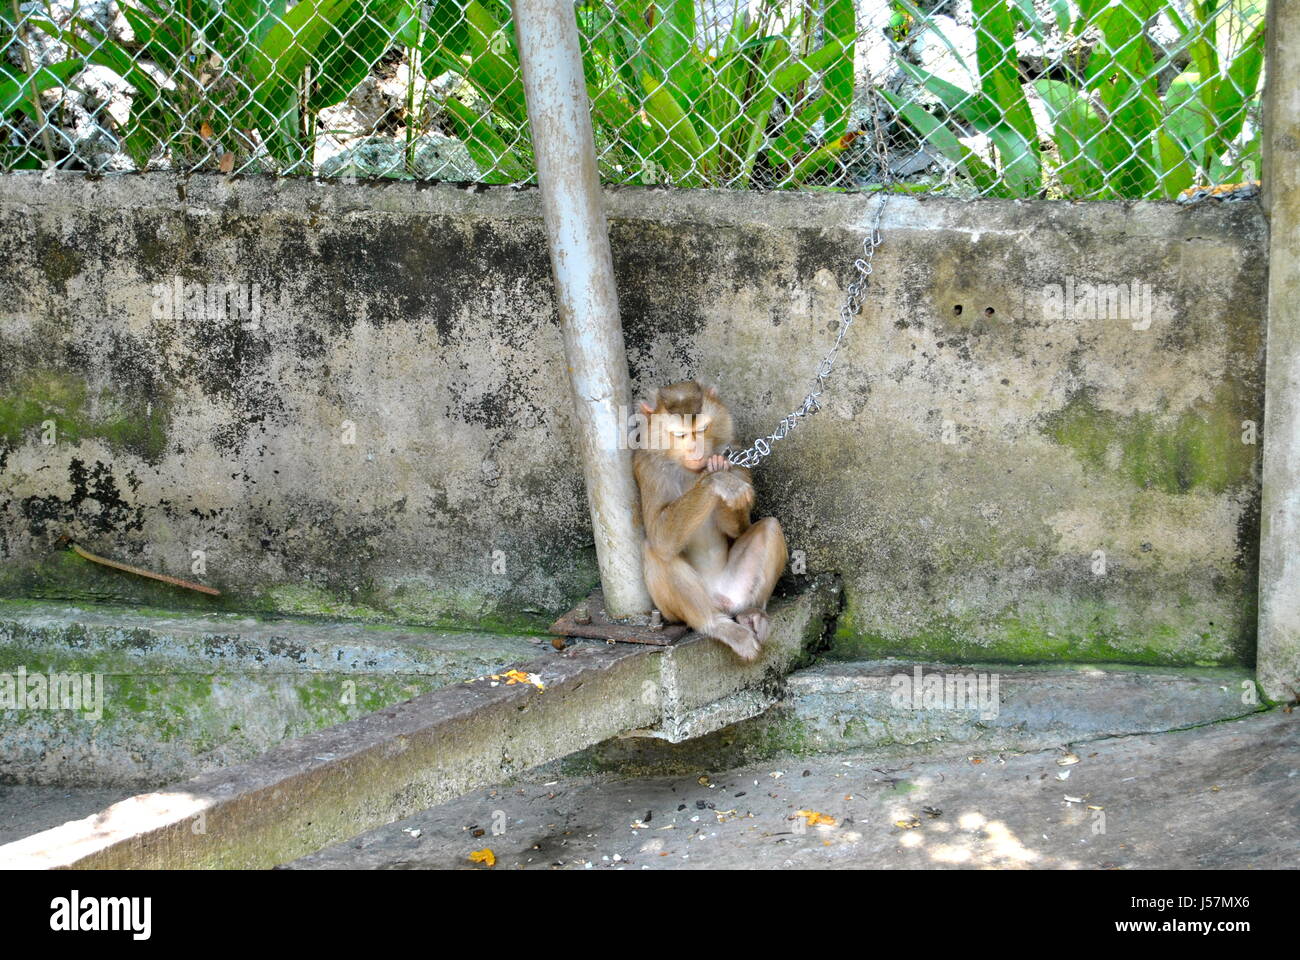 Chained Monkey, Can Tho, Vietnam Stock Photo